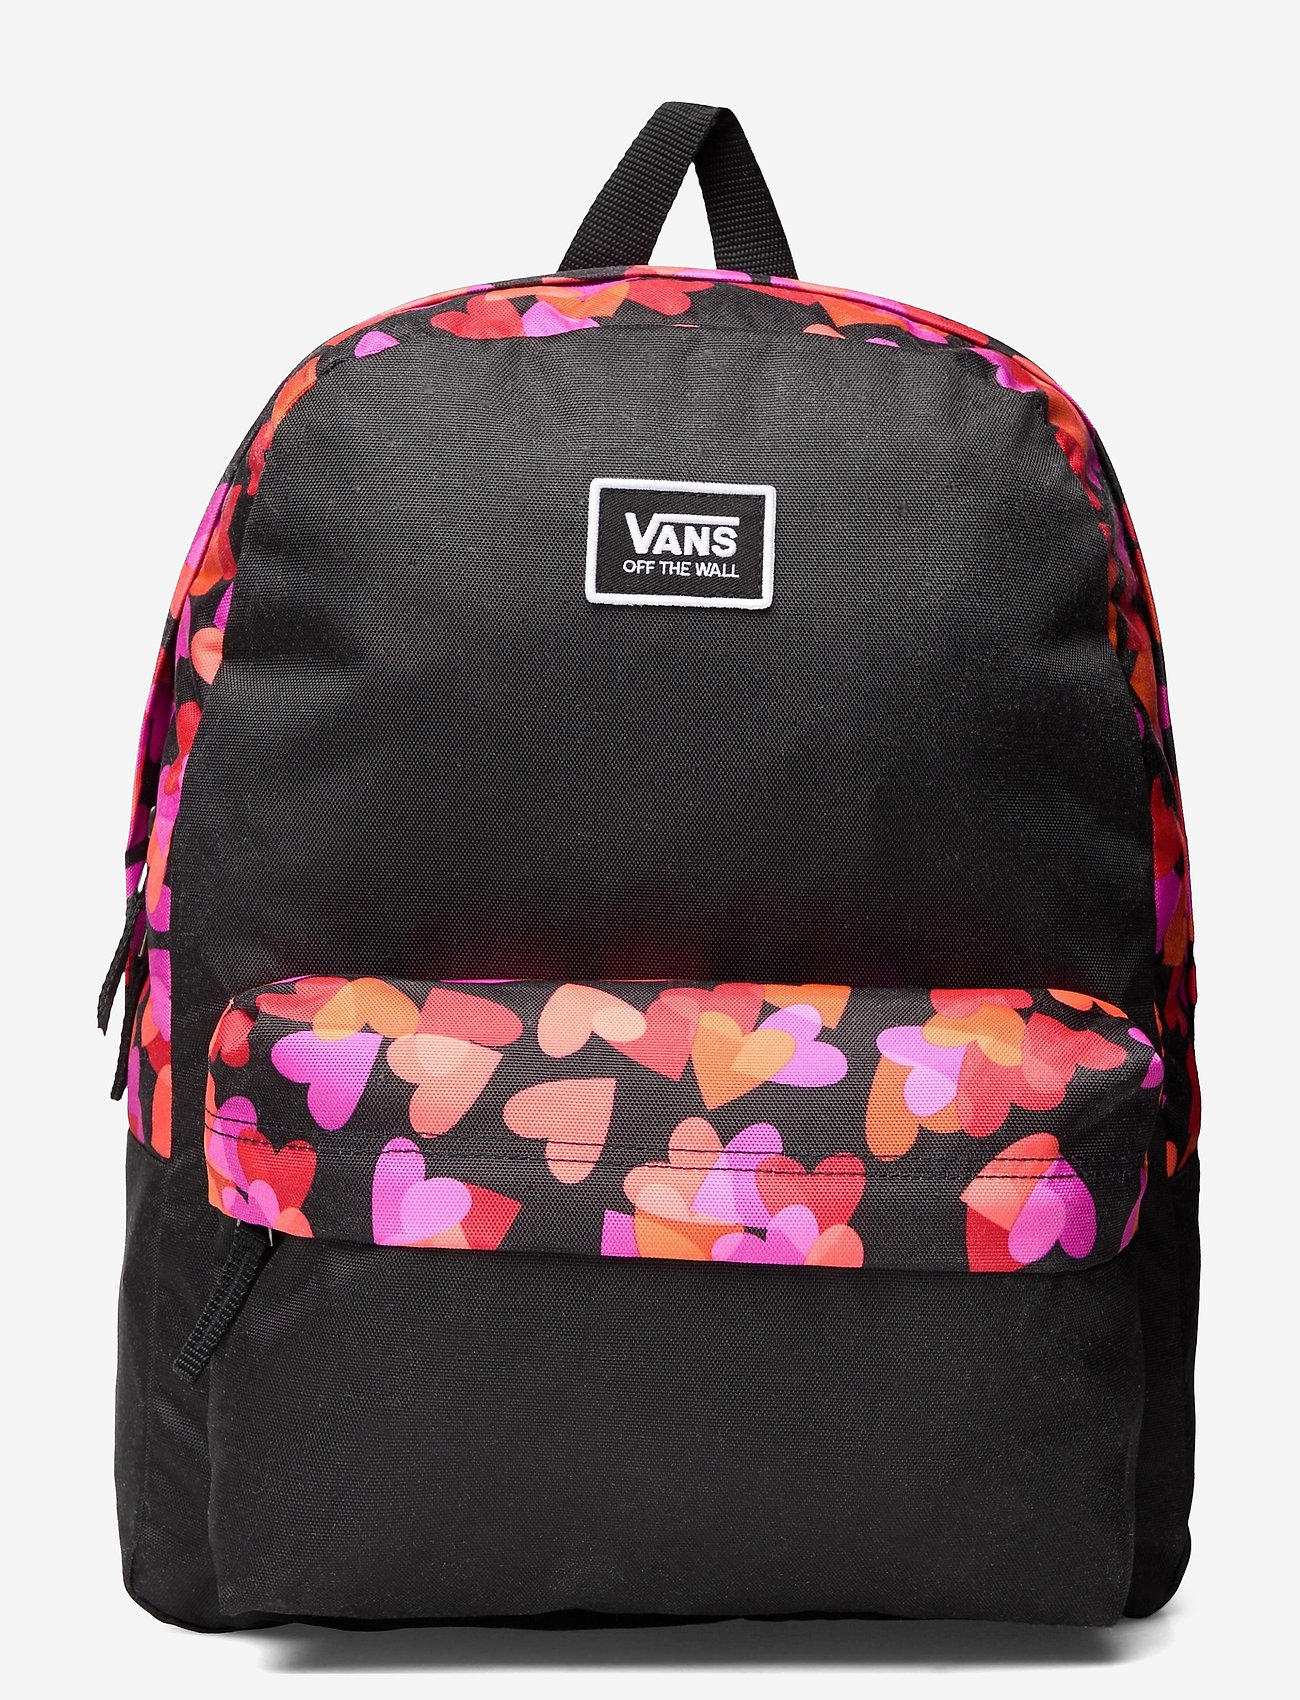 realm classic backpack